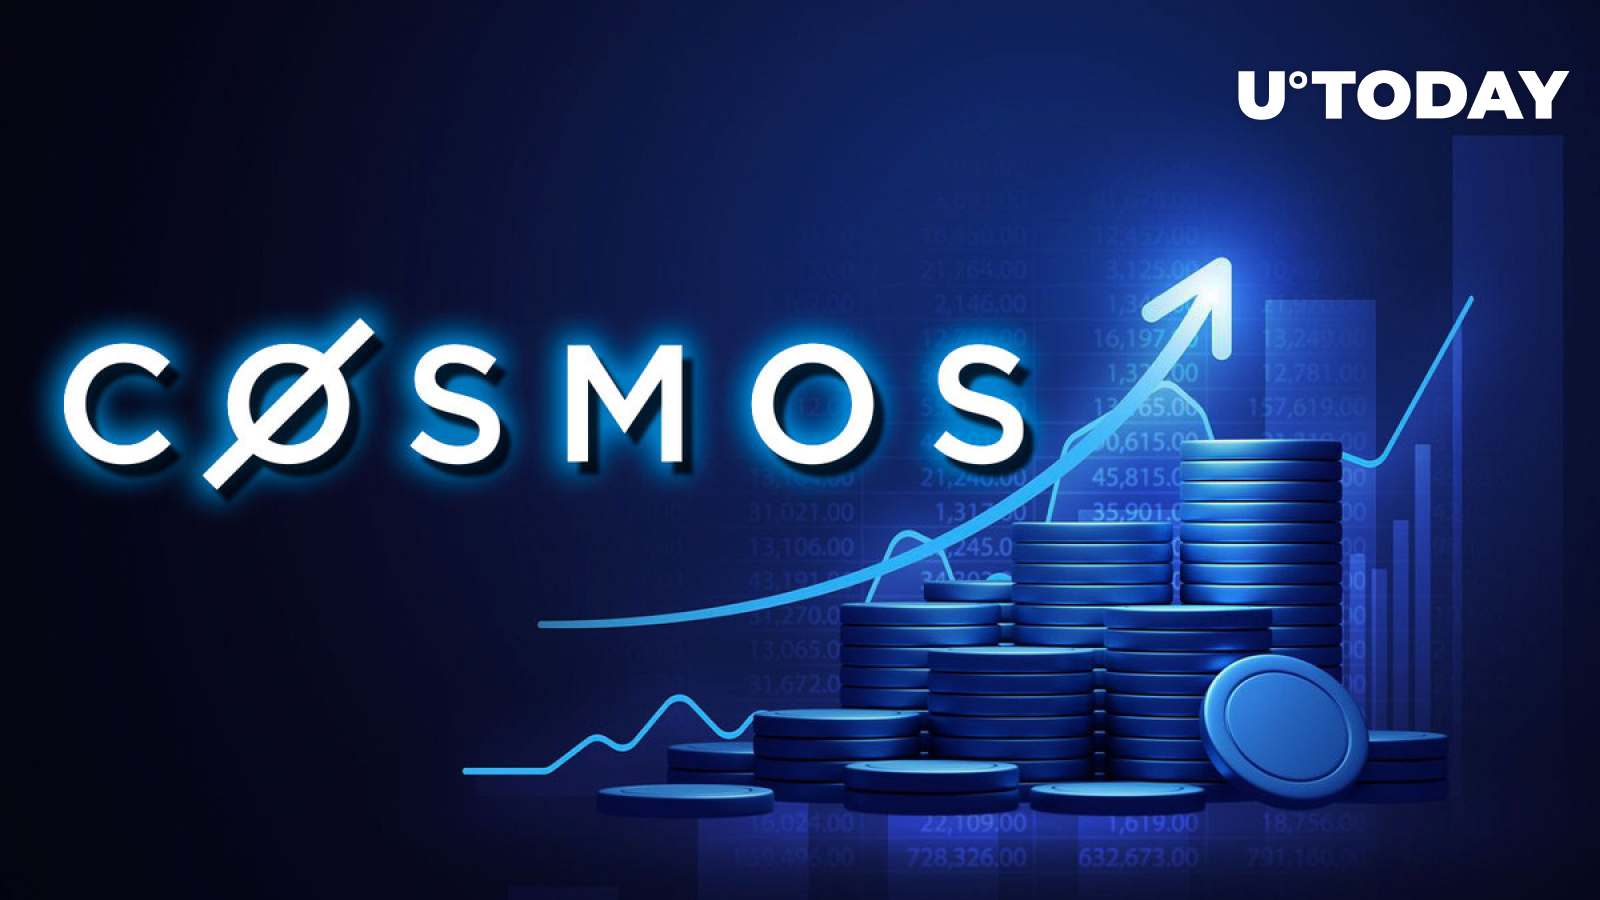 Cosmos (ATOM) Suddenly Jumps 15%, Here’s Why